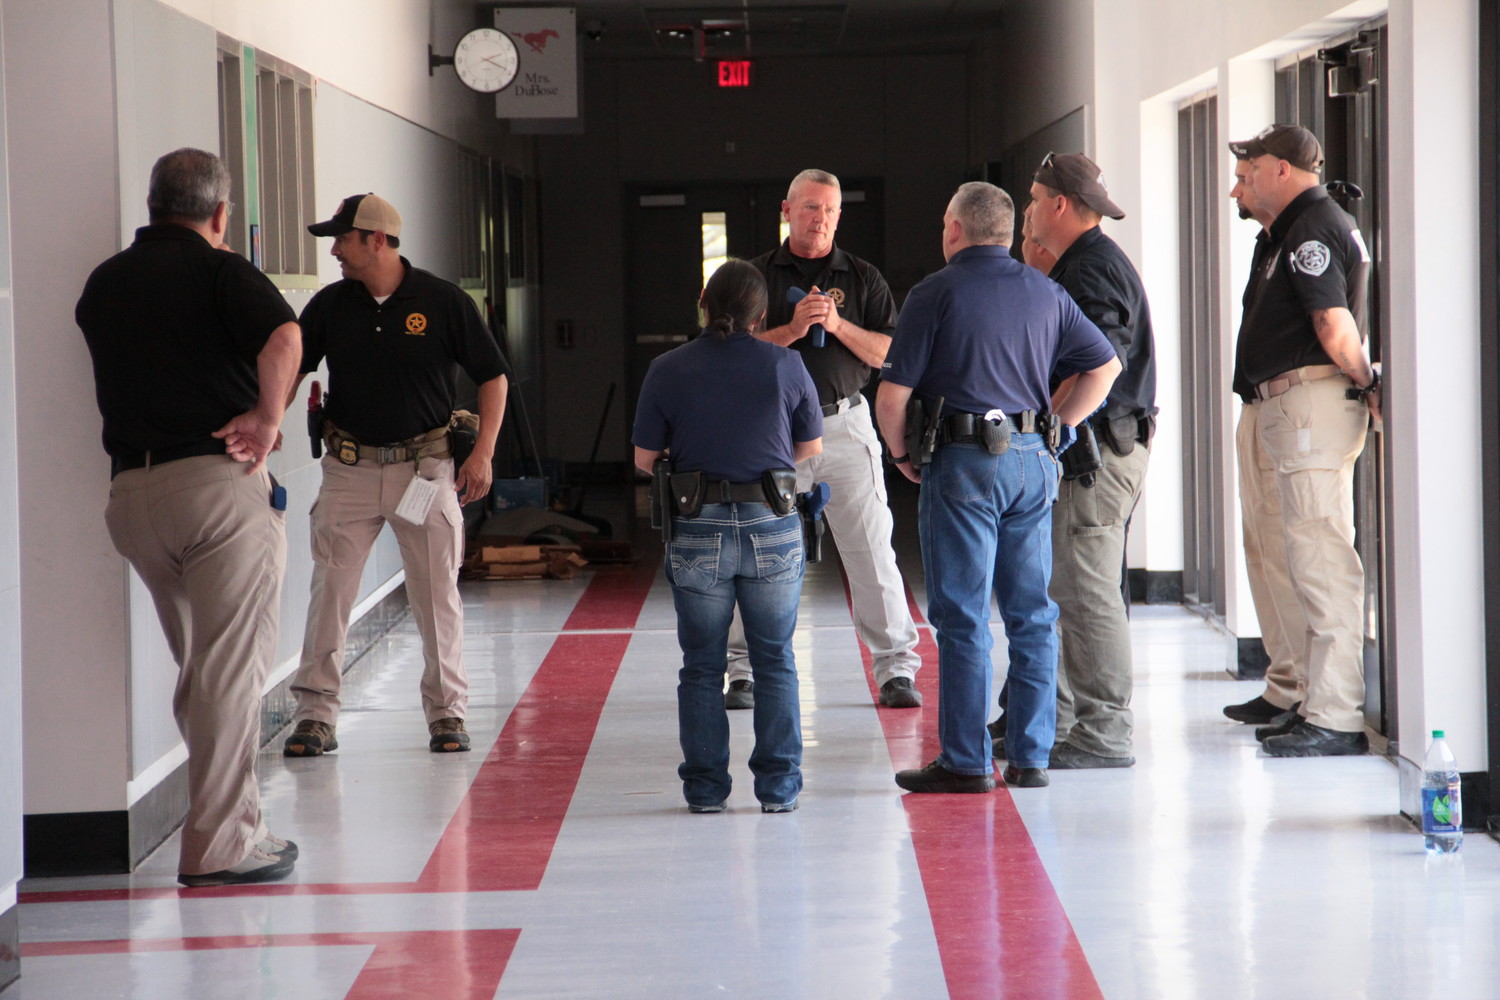 Officers from several agencies attended the ALERRT class at Smiley Elementary. Live scenarios were performed in the very halls where students will return in a matter of weeks.